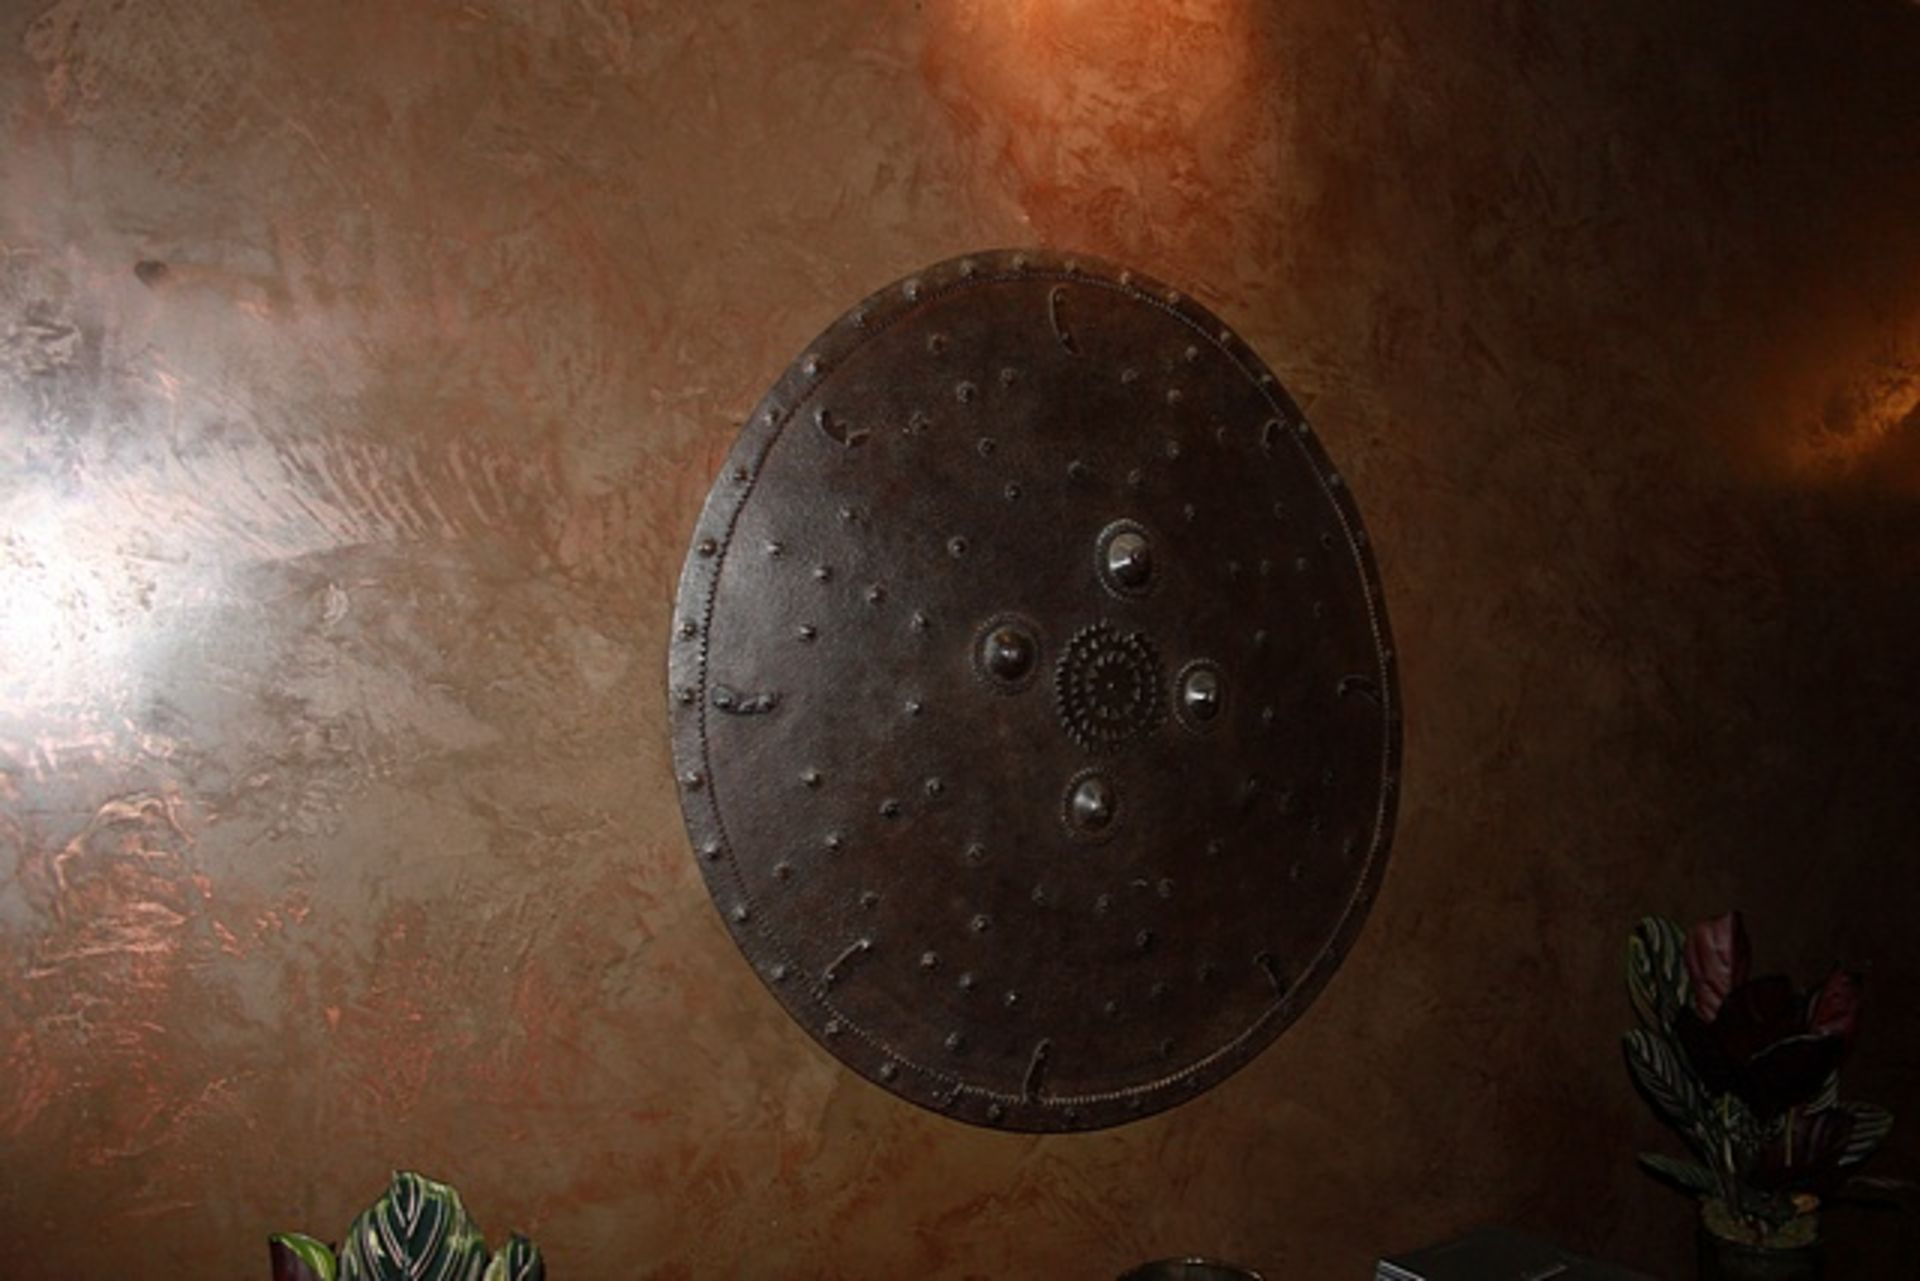 Metal wall art in the form of a shield 700mm diameter